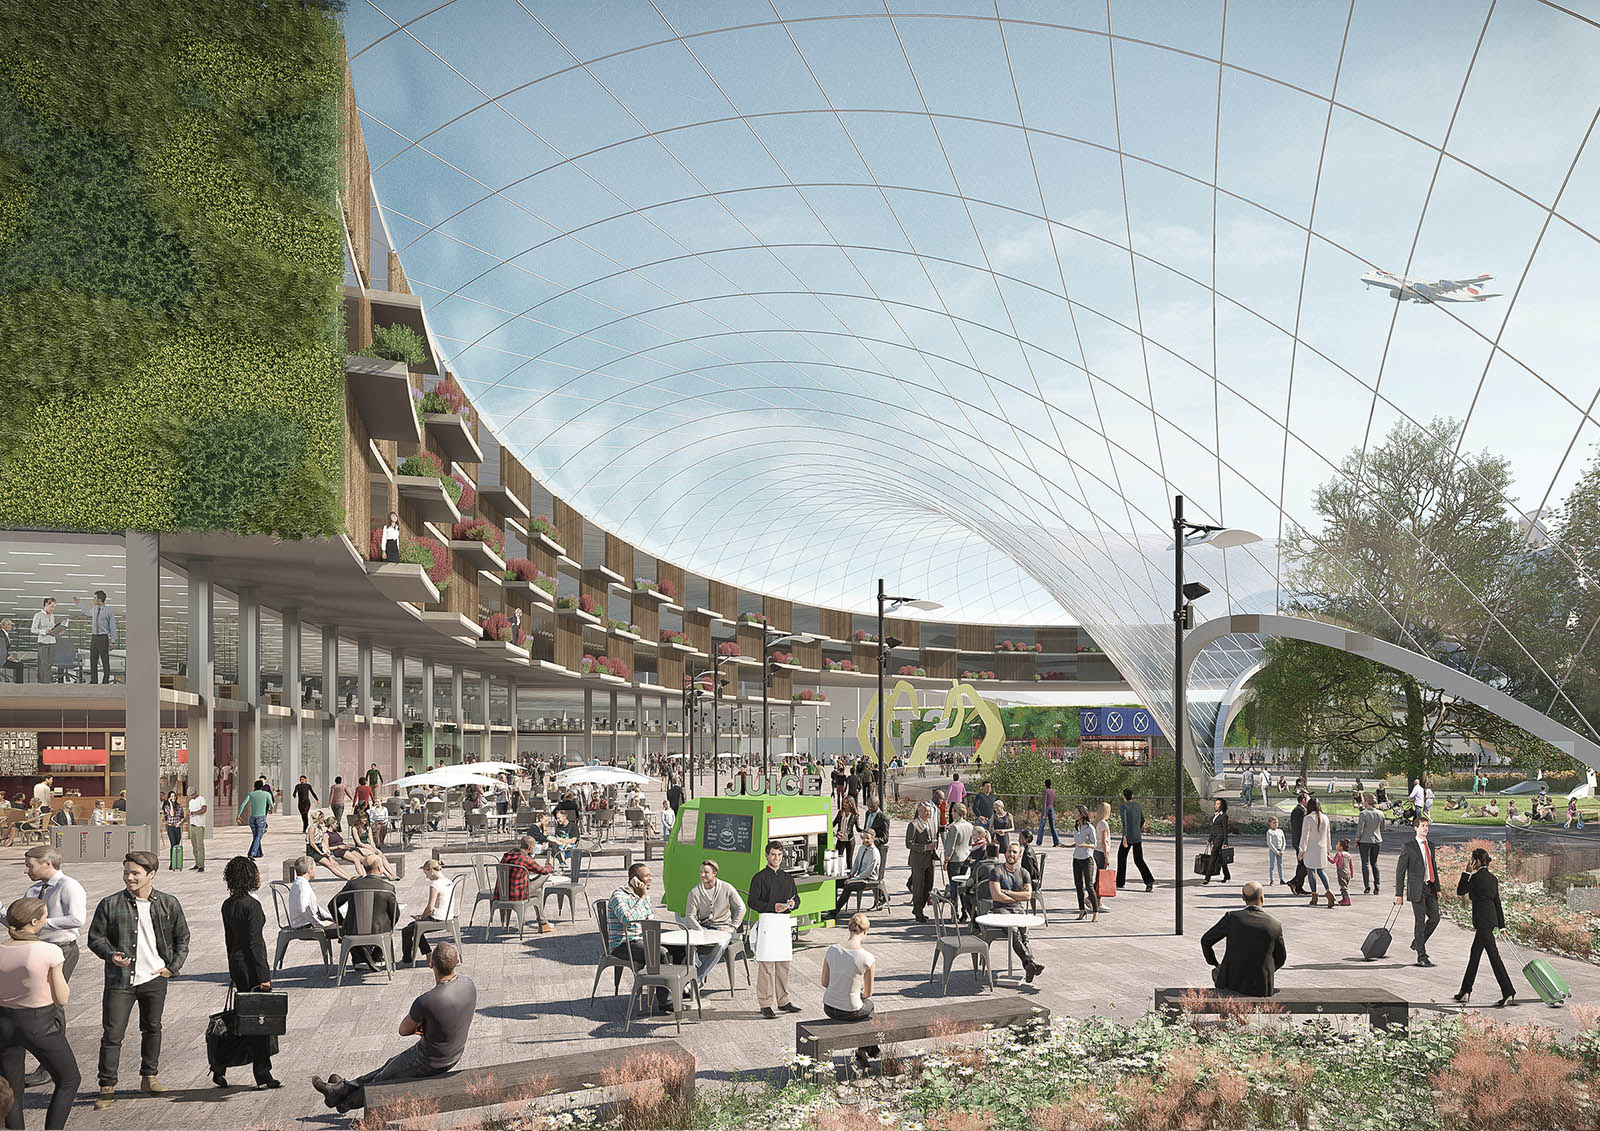 Proposed public realm at Heathrow Central Terminal area